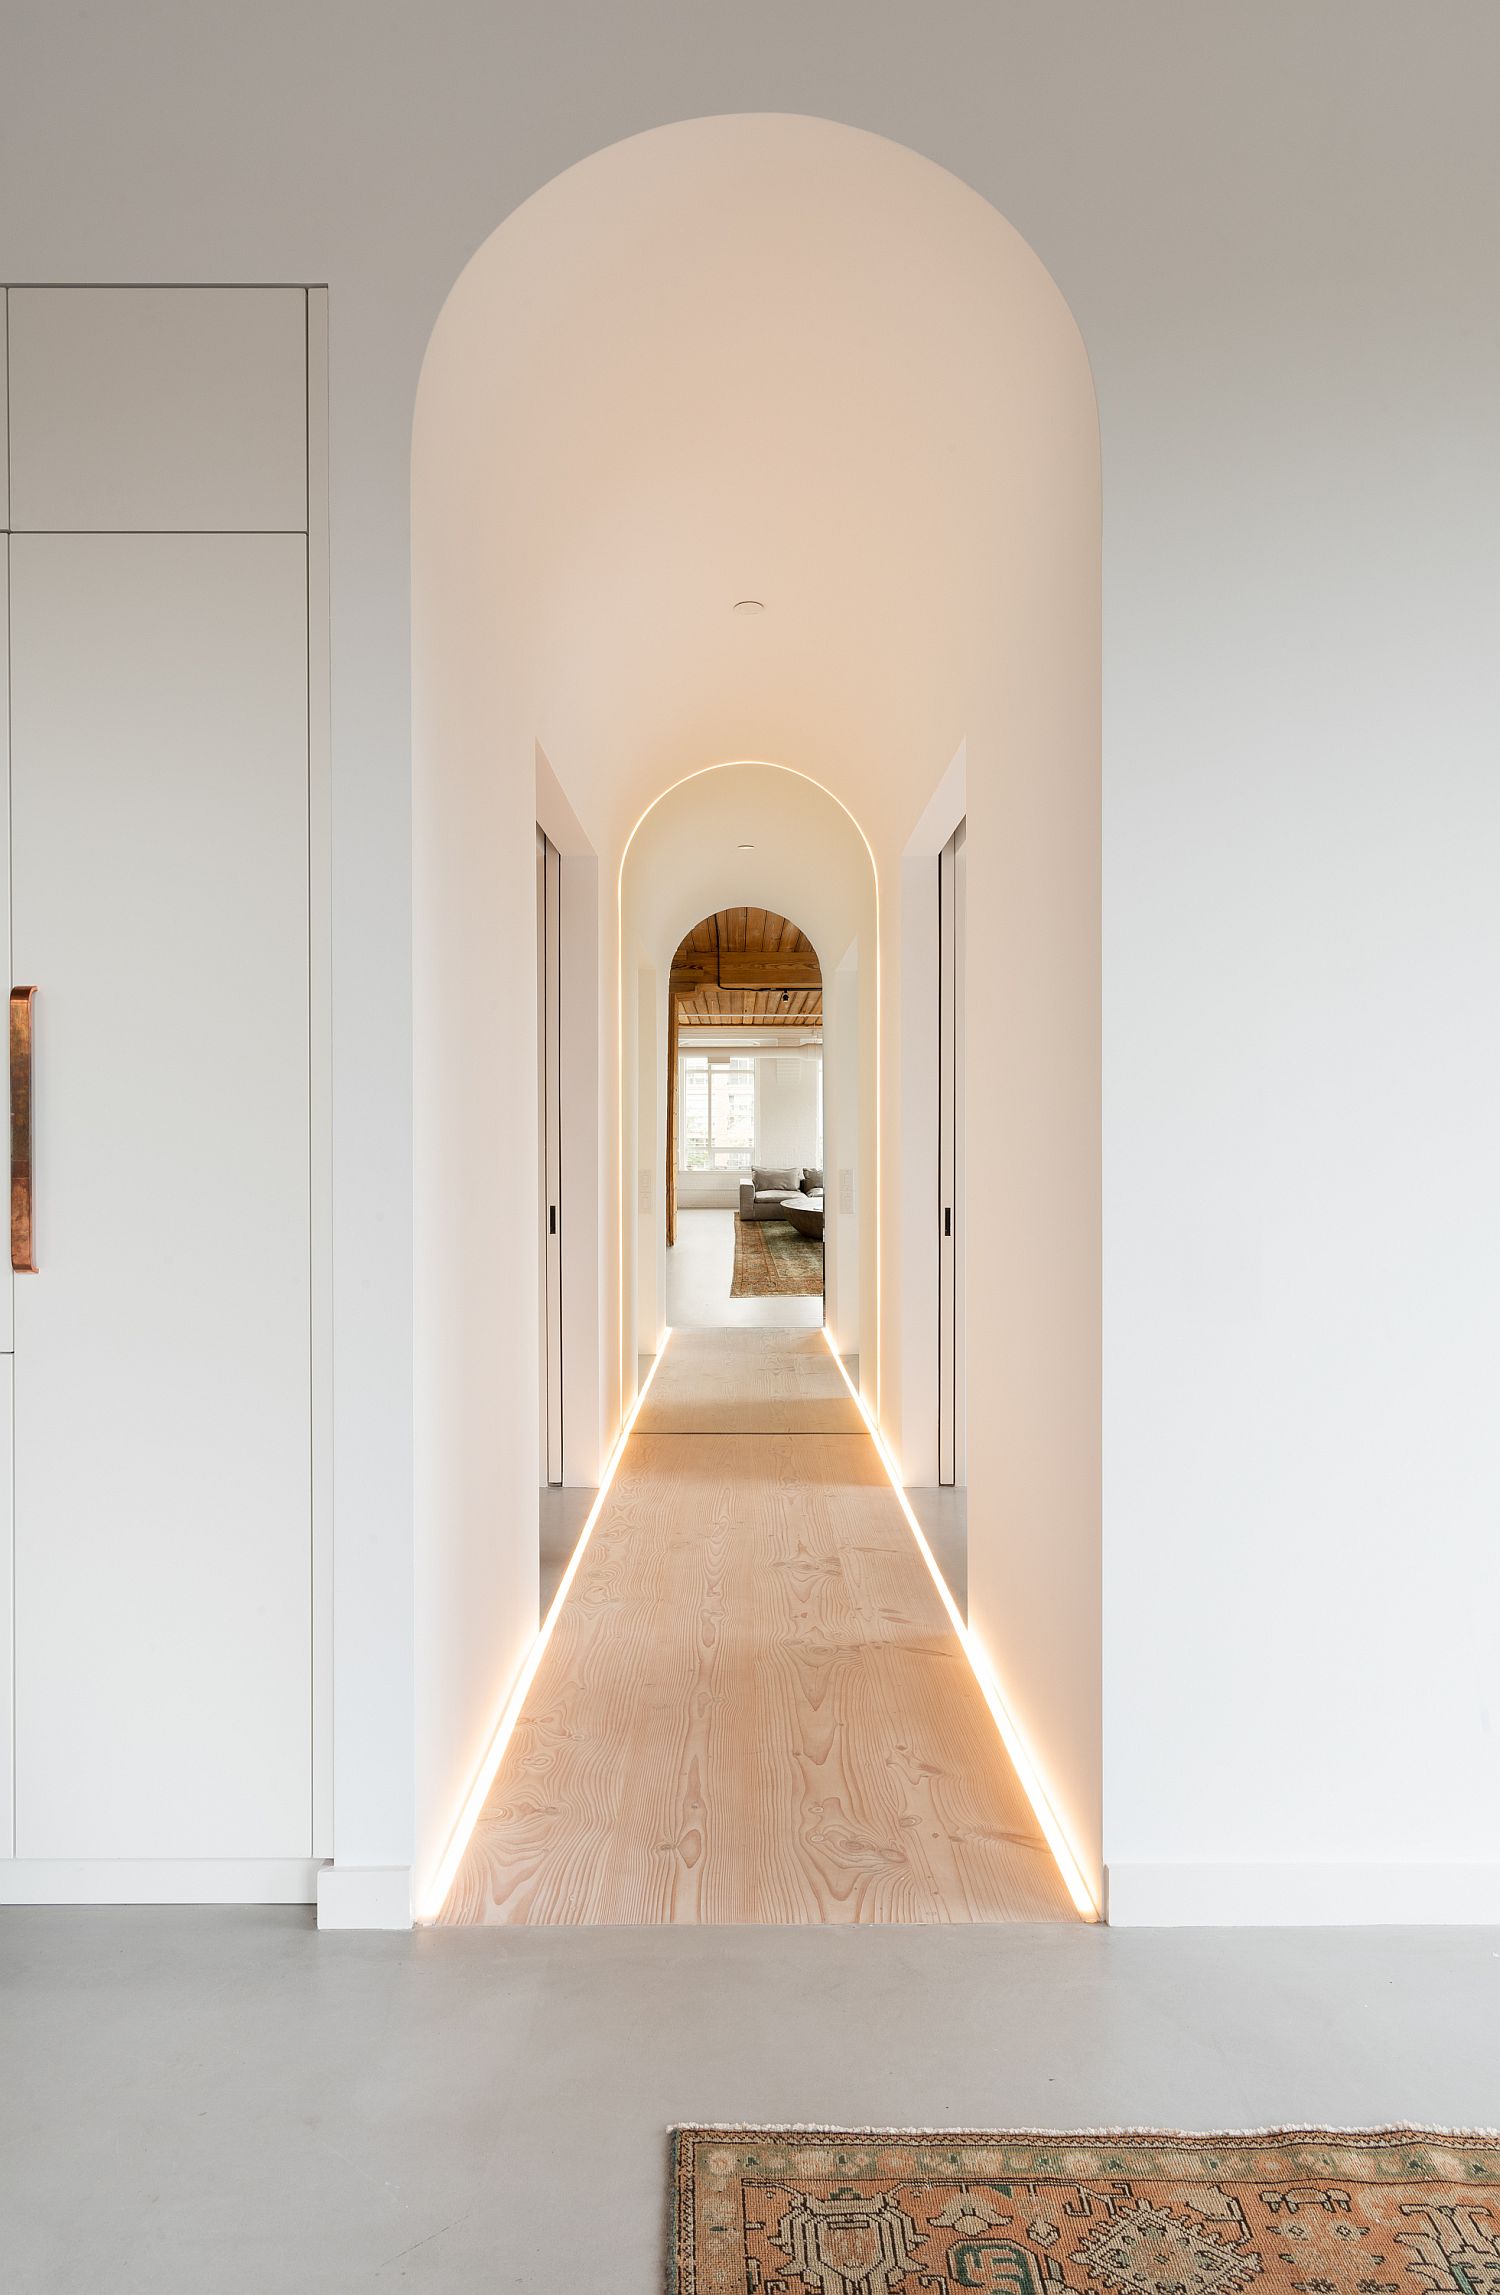 Strip LED lighting and archways create a beautiful interior